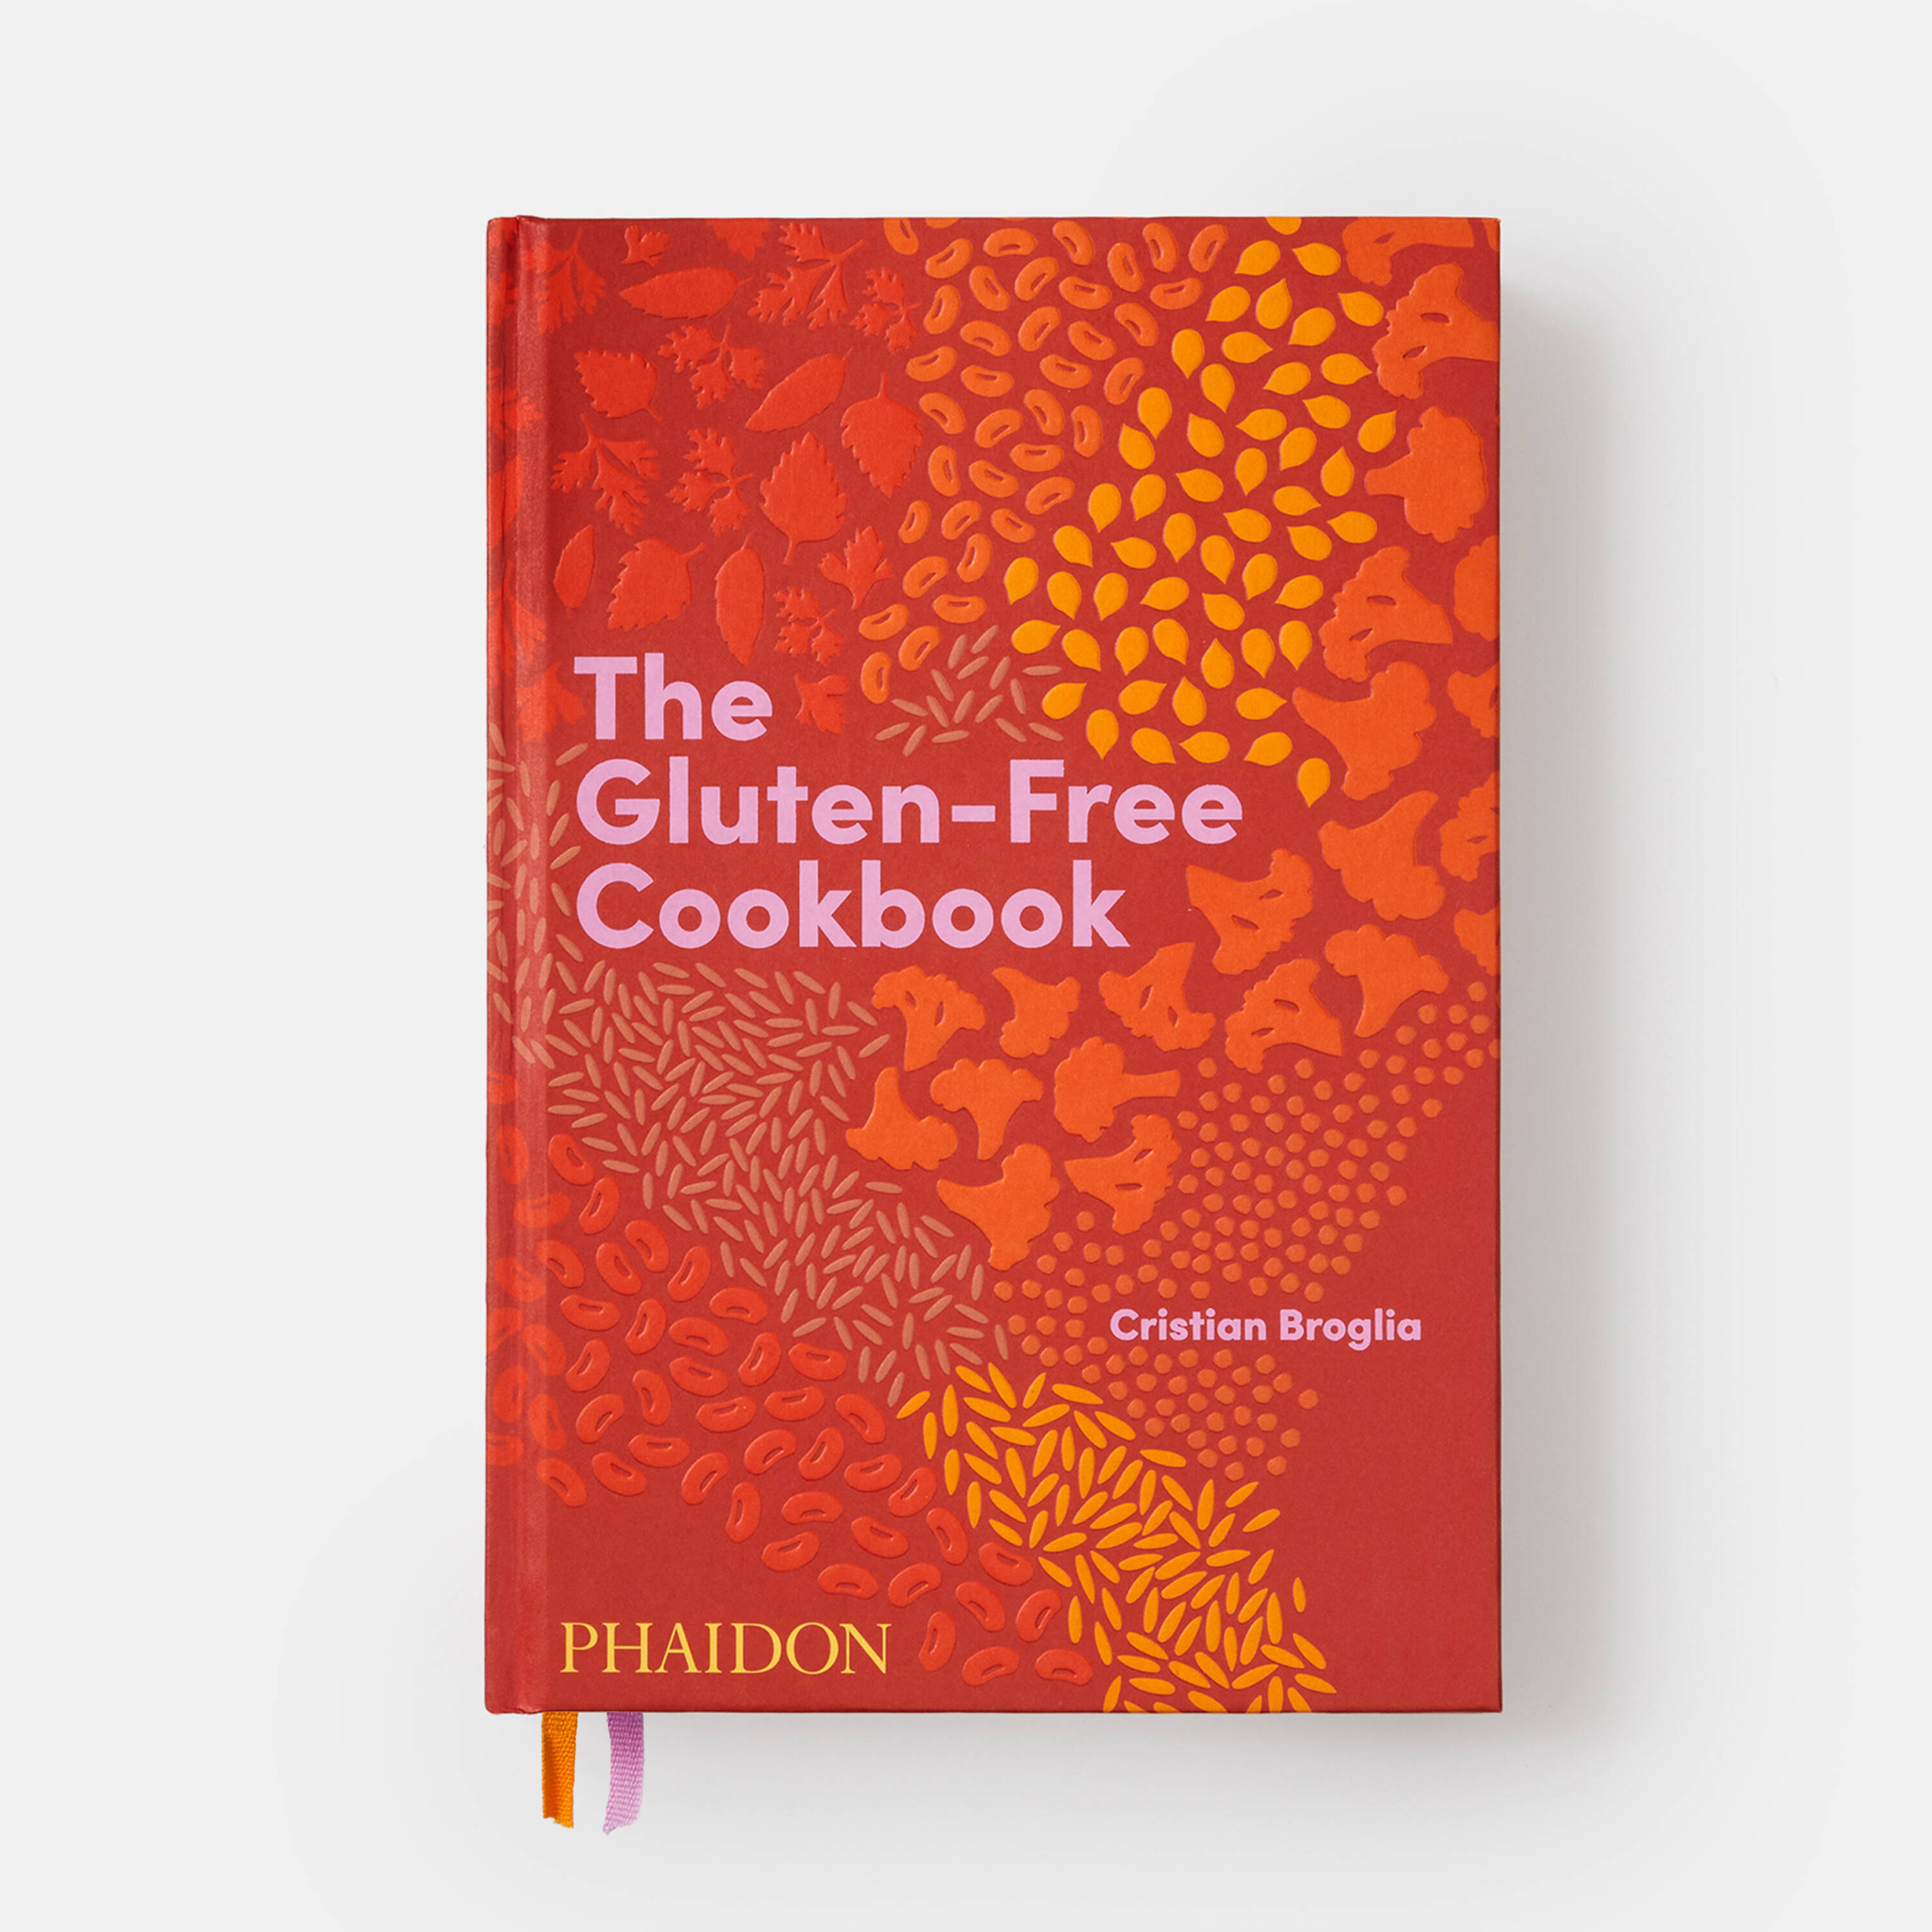 All you need to know about The Gluten-Free Cookbook